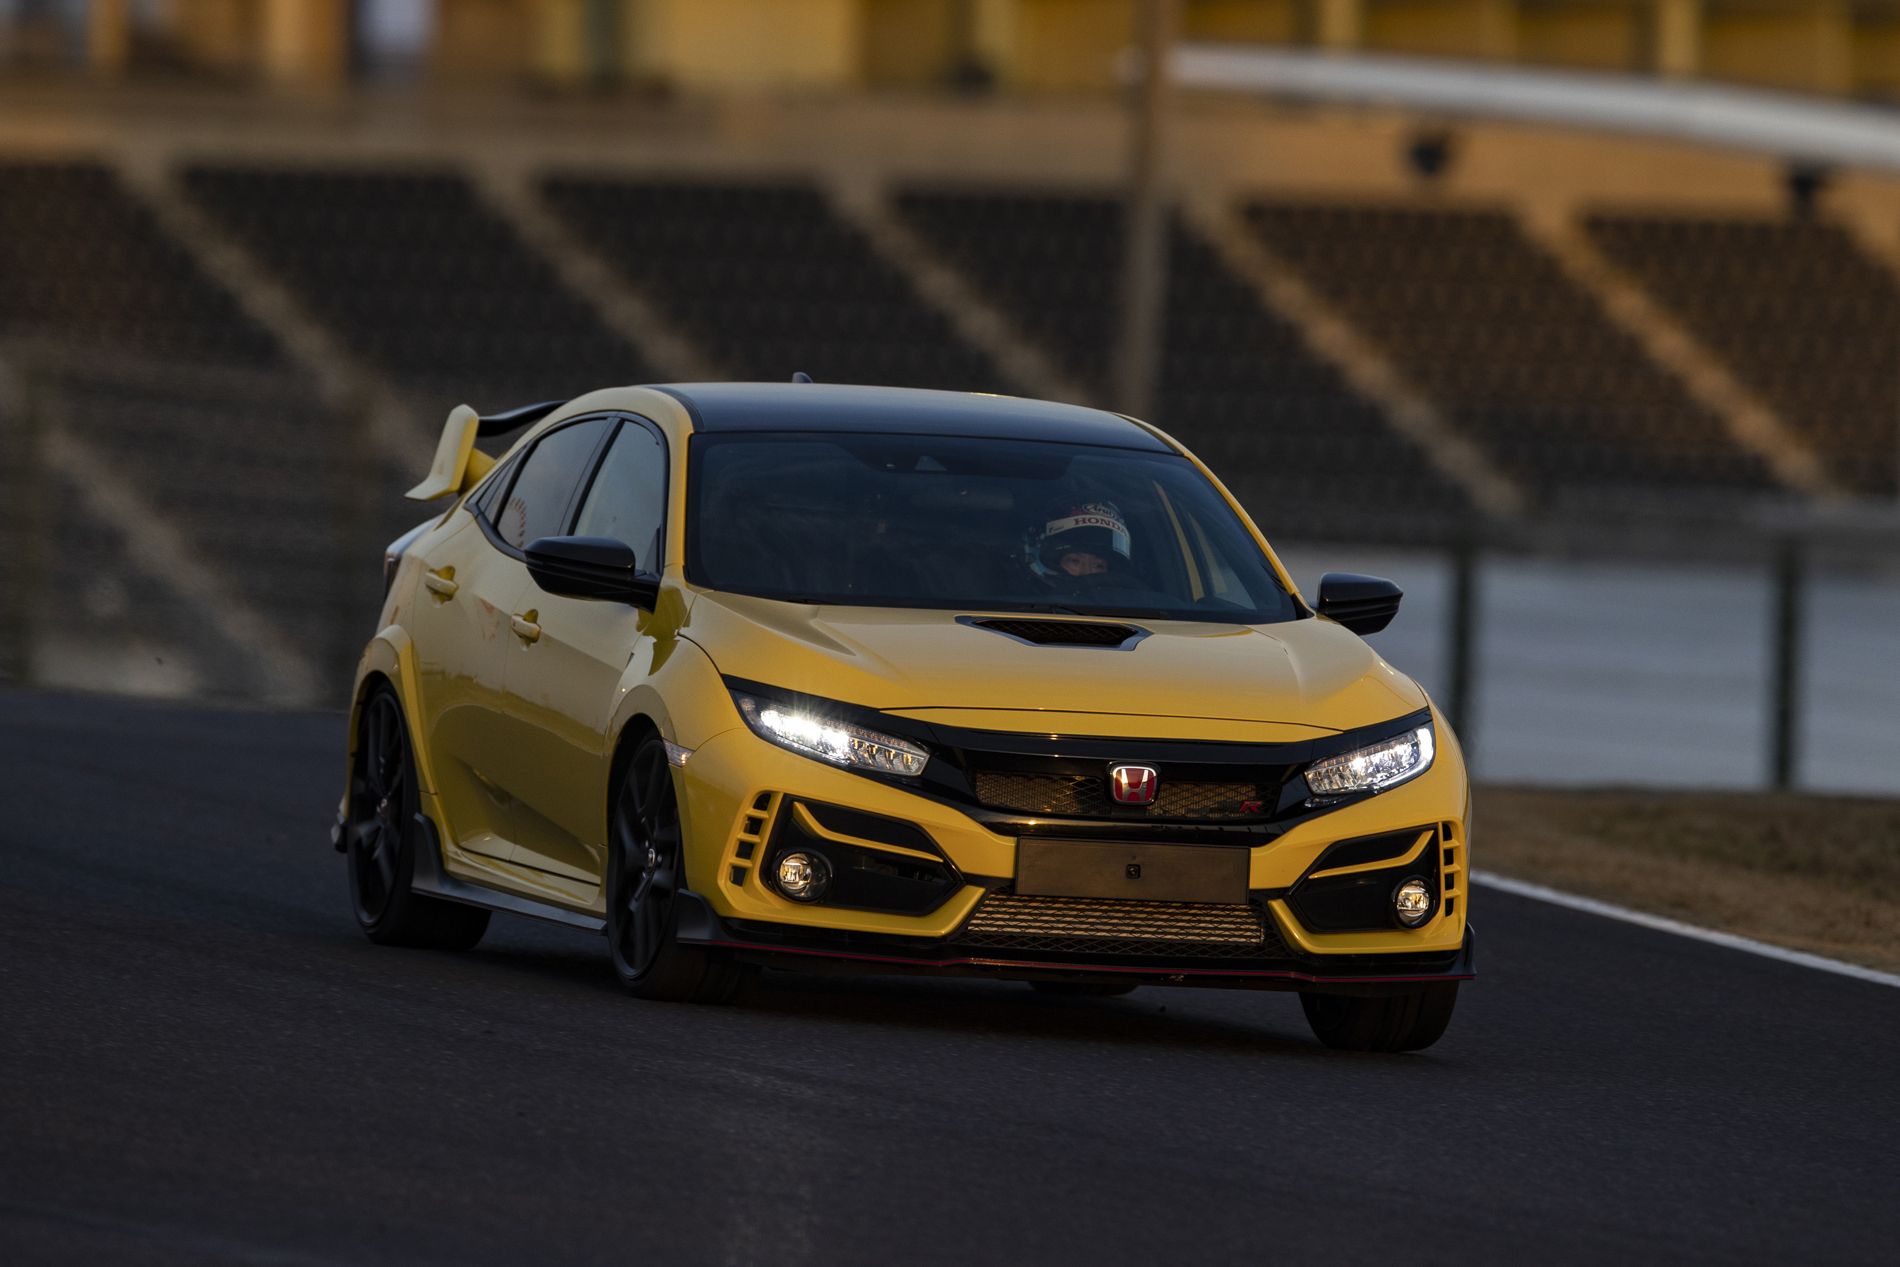 Honda Civic Type R Features And Specs